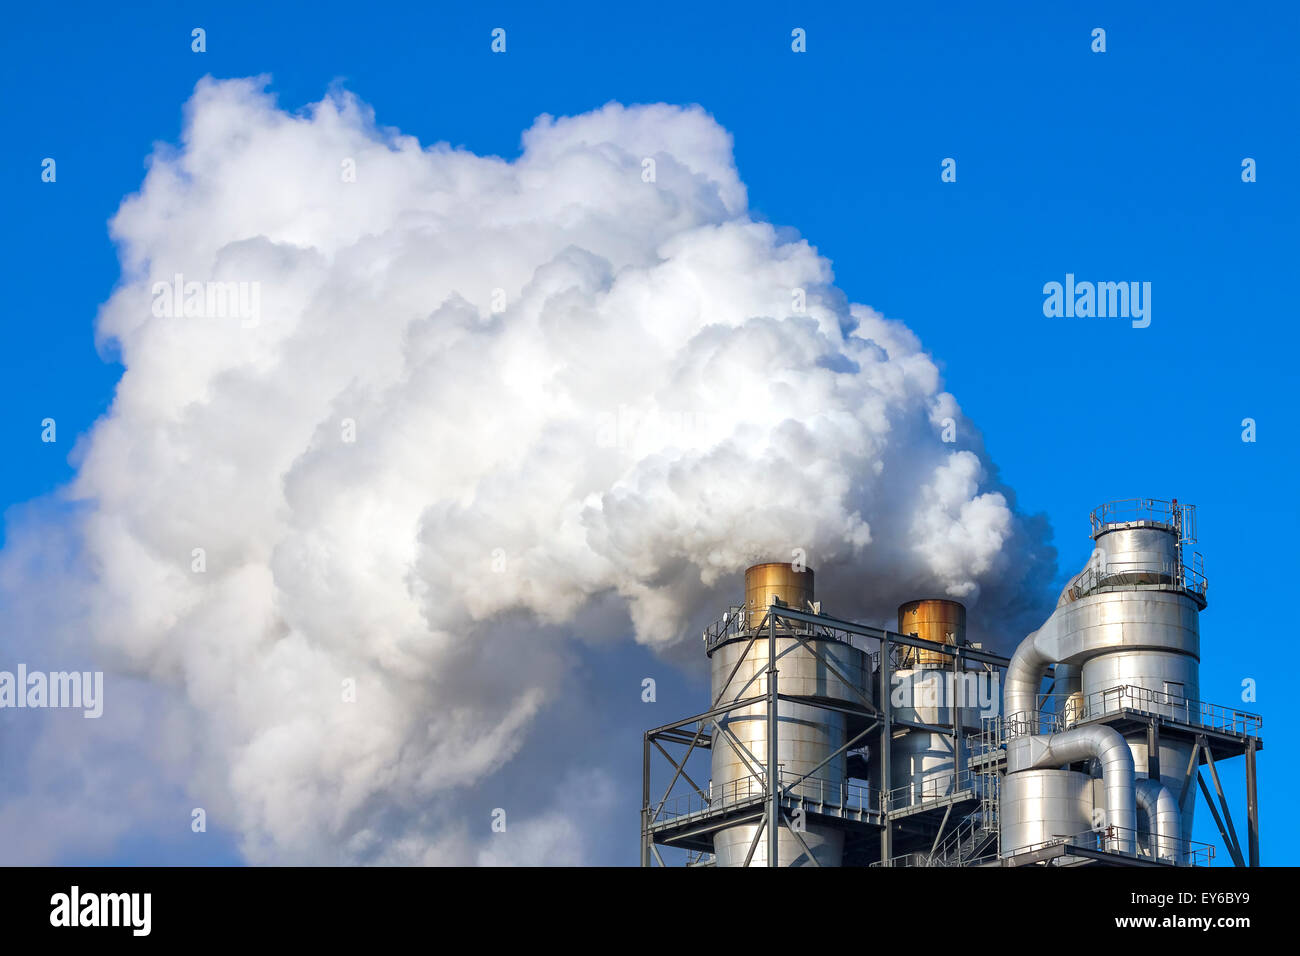 Smoke clouds from a chimney against blue sky, environment pollution concept. Stock Photo